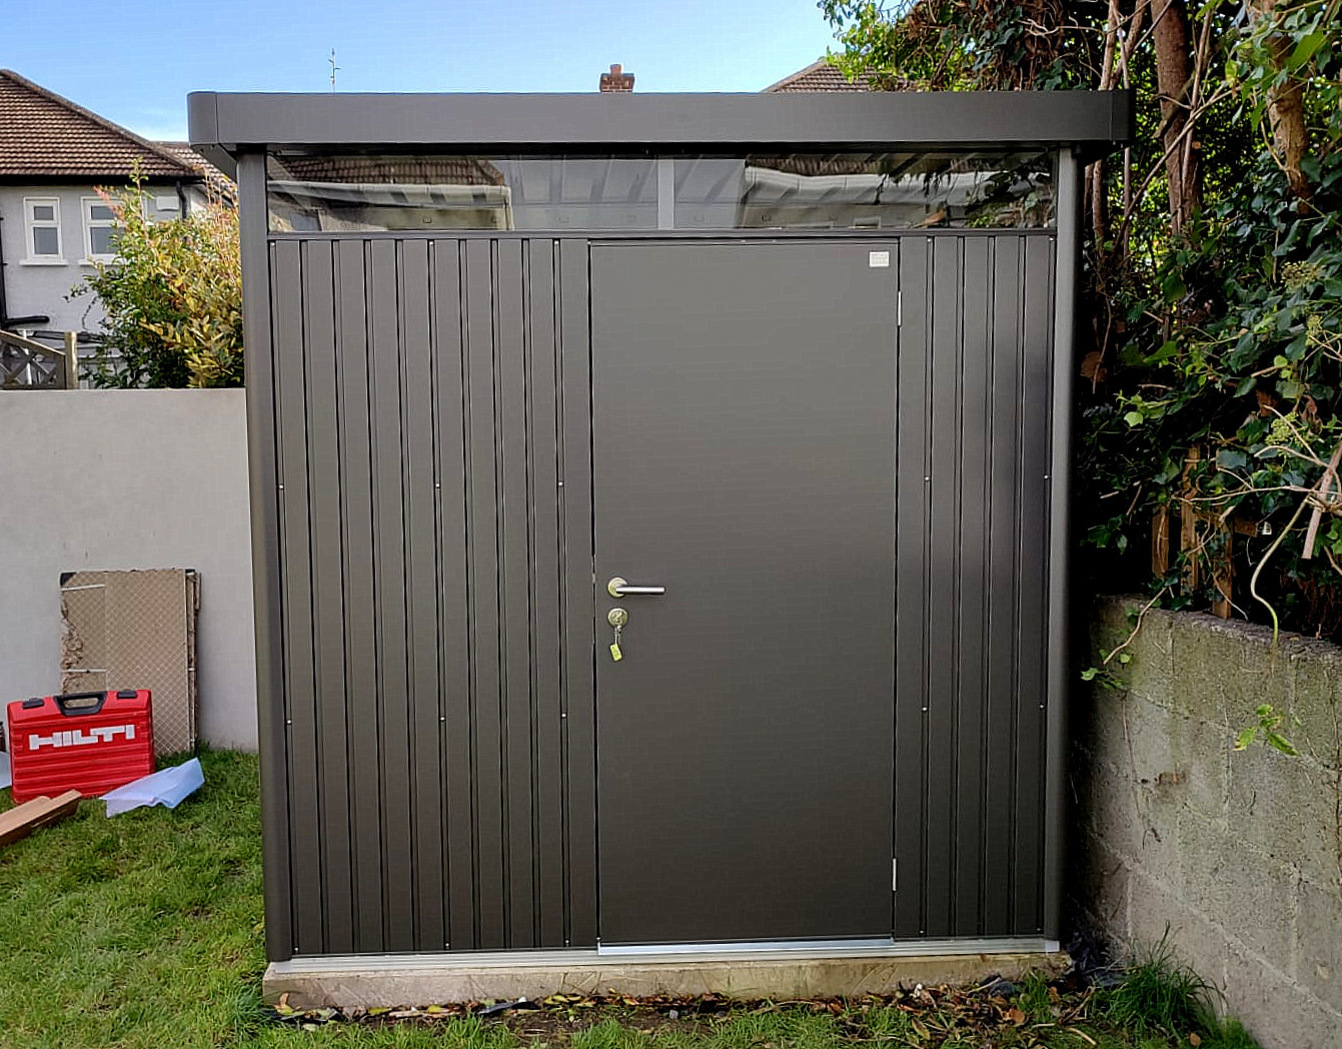 The Biohort HighLine H3 in metallic dark grey |  Supplied + Fitted in Terenure, Dublin 6W by Owen Chubb Landscapers | Ireland's #1 Biohort Dealer for Value & Installations